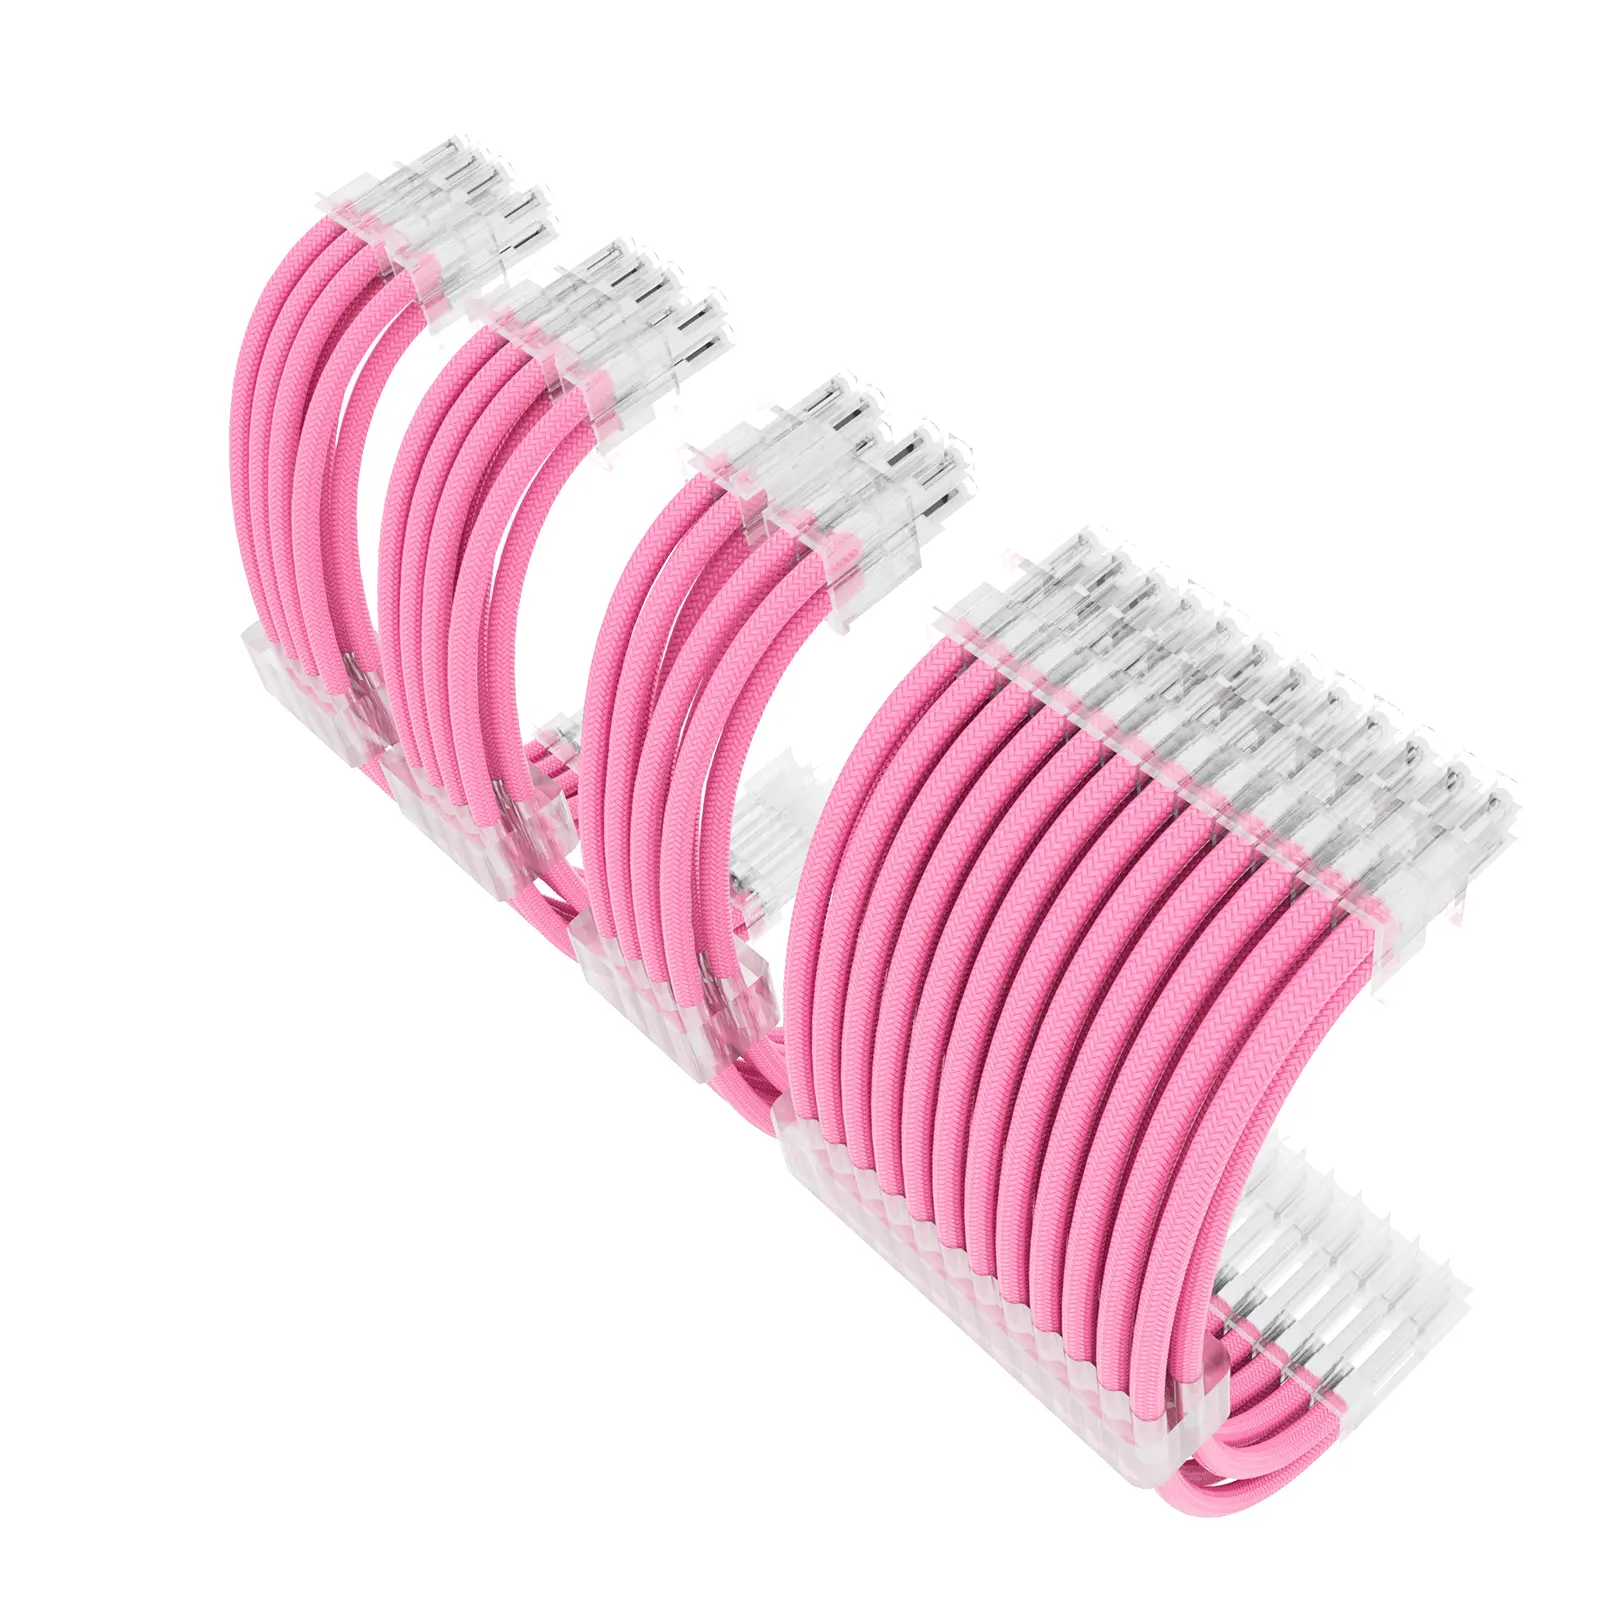 ATX Pink PSU Extension Cable Sleeved Customization PC Power Supply Cable Nylon Braided with Comb Kit 18AWG 24 P/2*6+2 P/4+4P